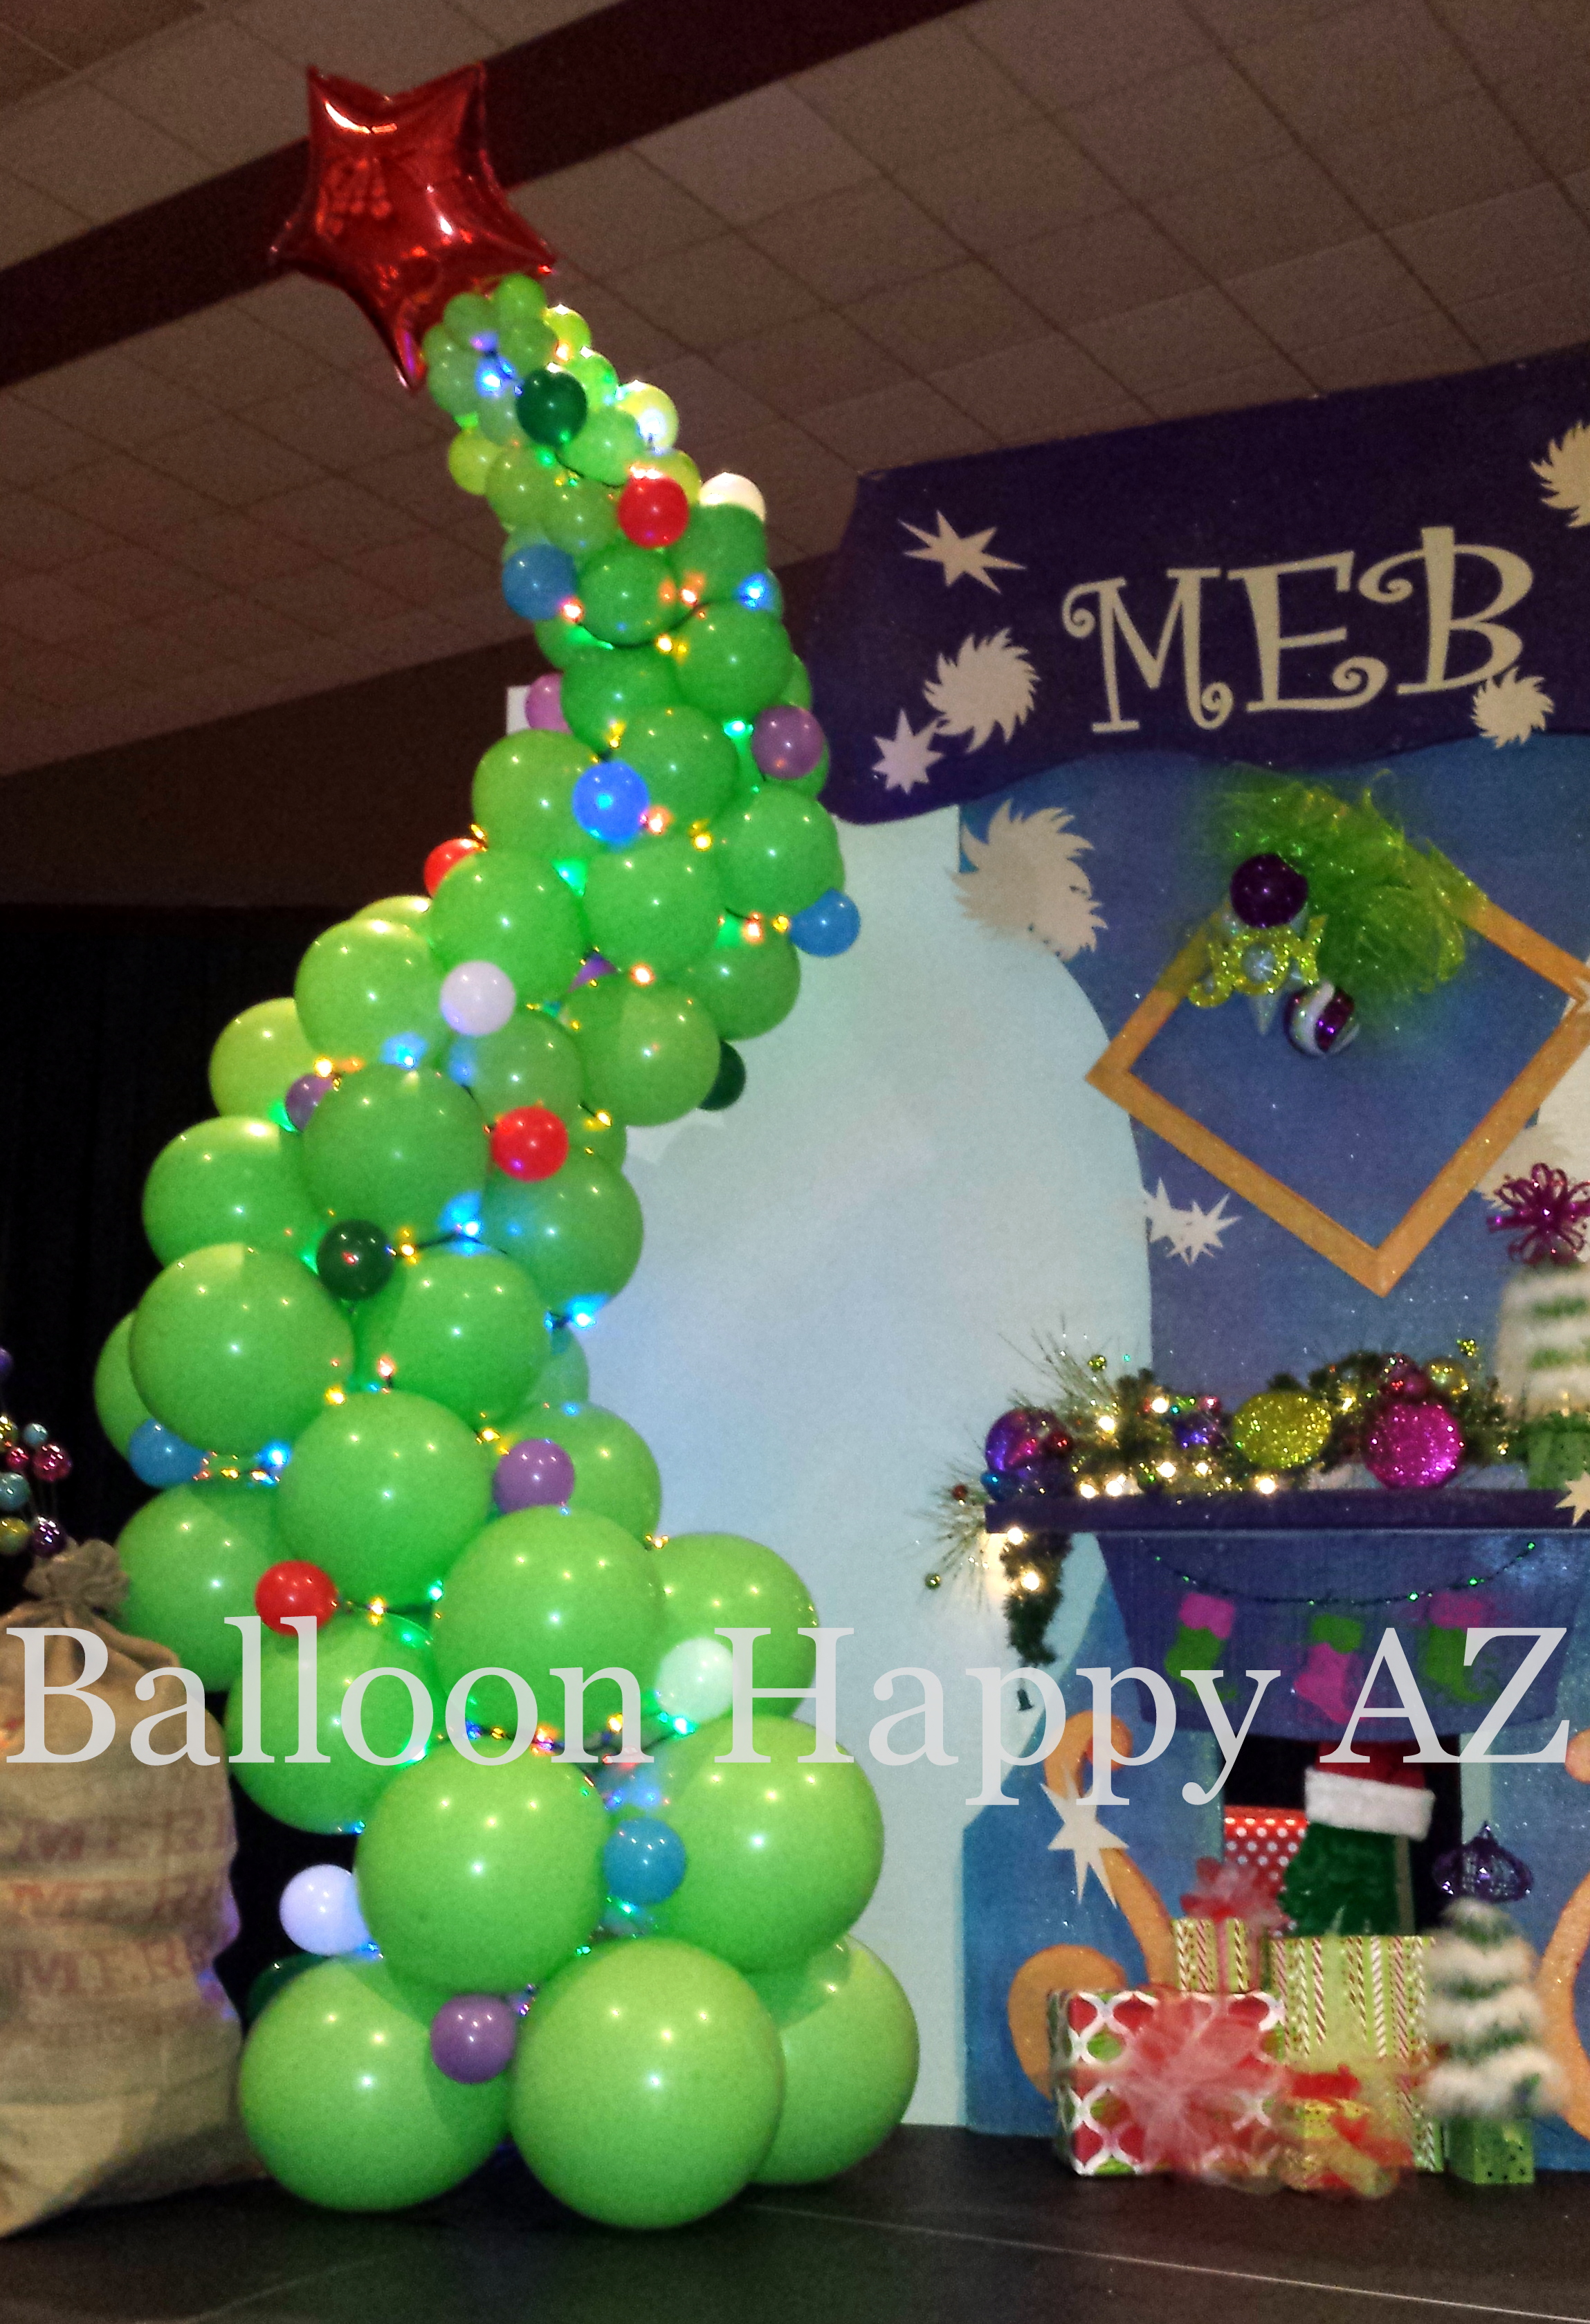 Whoville Christmas Party Ideas Balloonhappyaz Blog   See What Makes